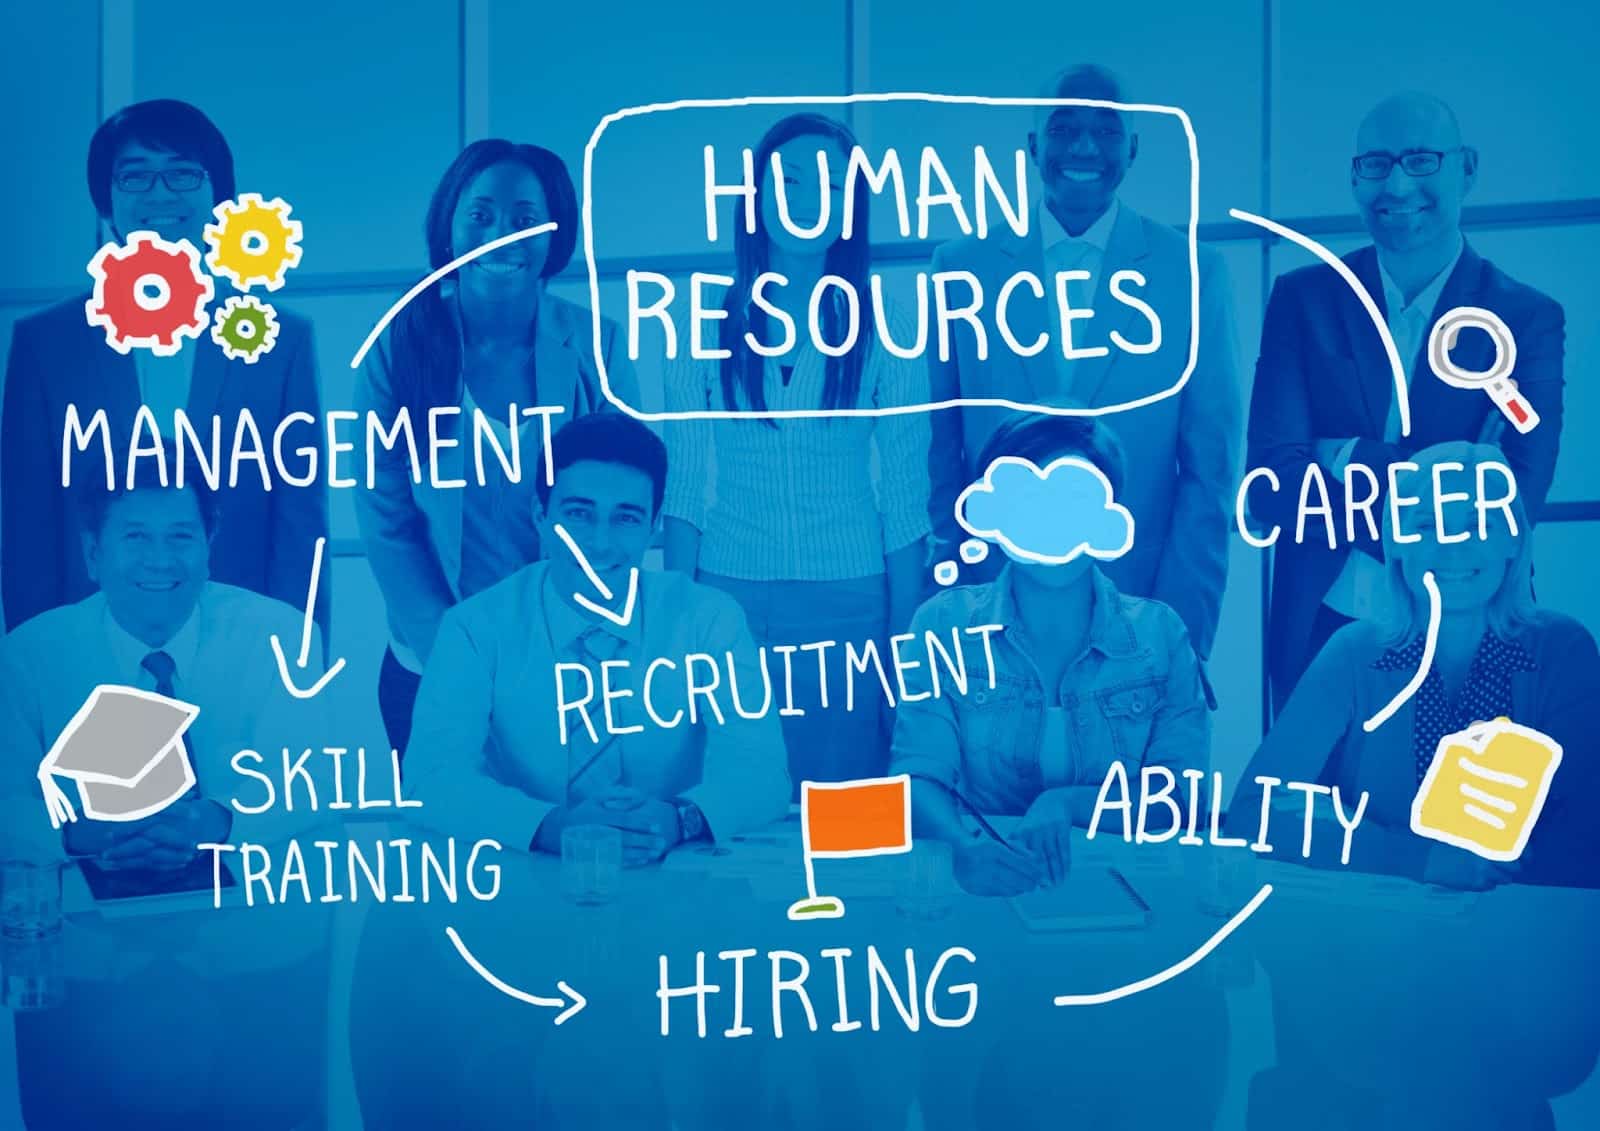 Human resources is always a difficult problem in all professions